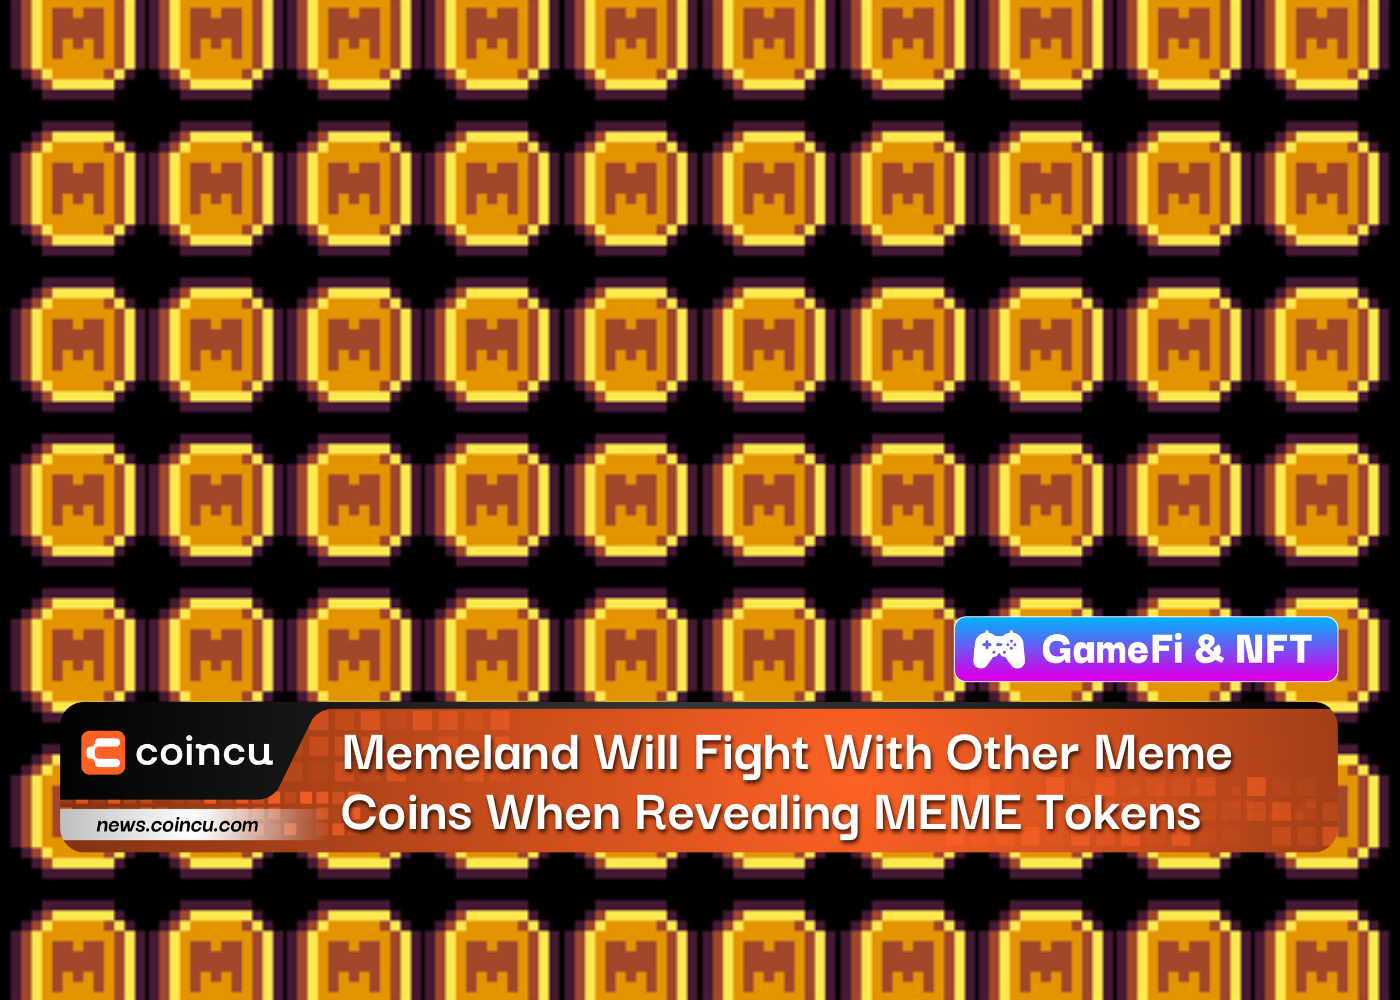 Memeland Will Fight With Other Meme Coins When Revealing MEME Tokens